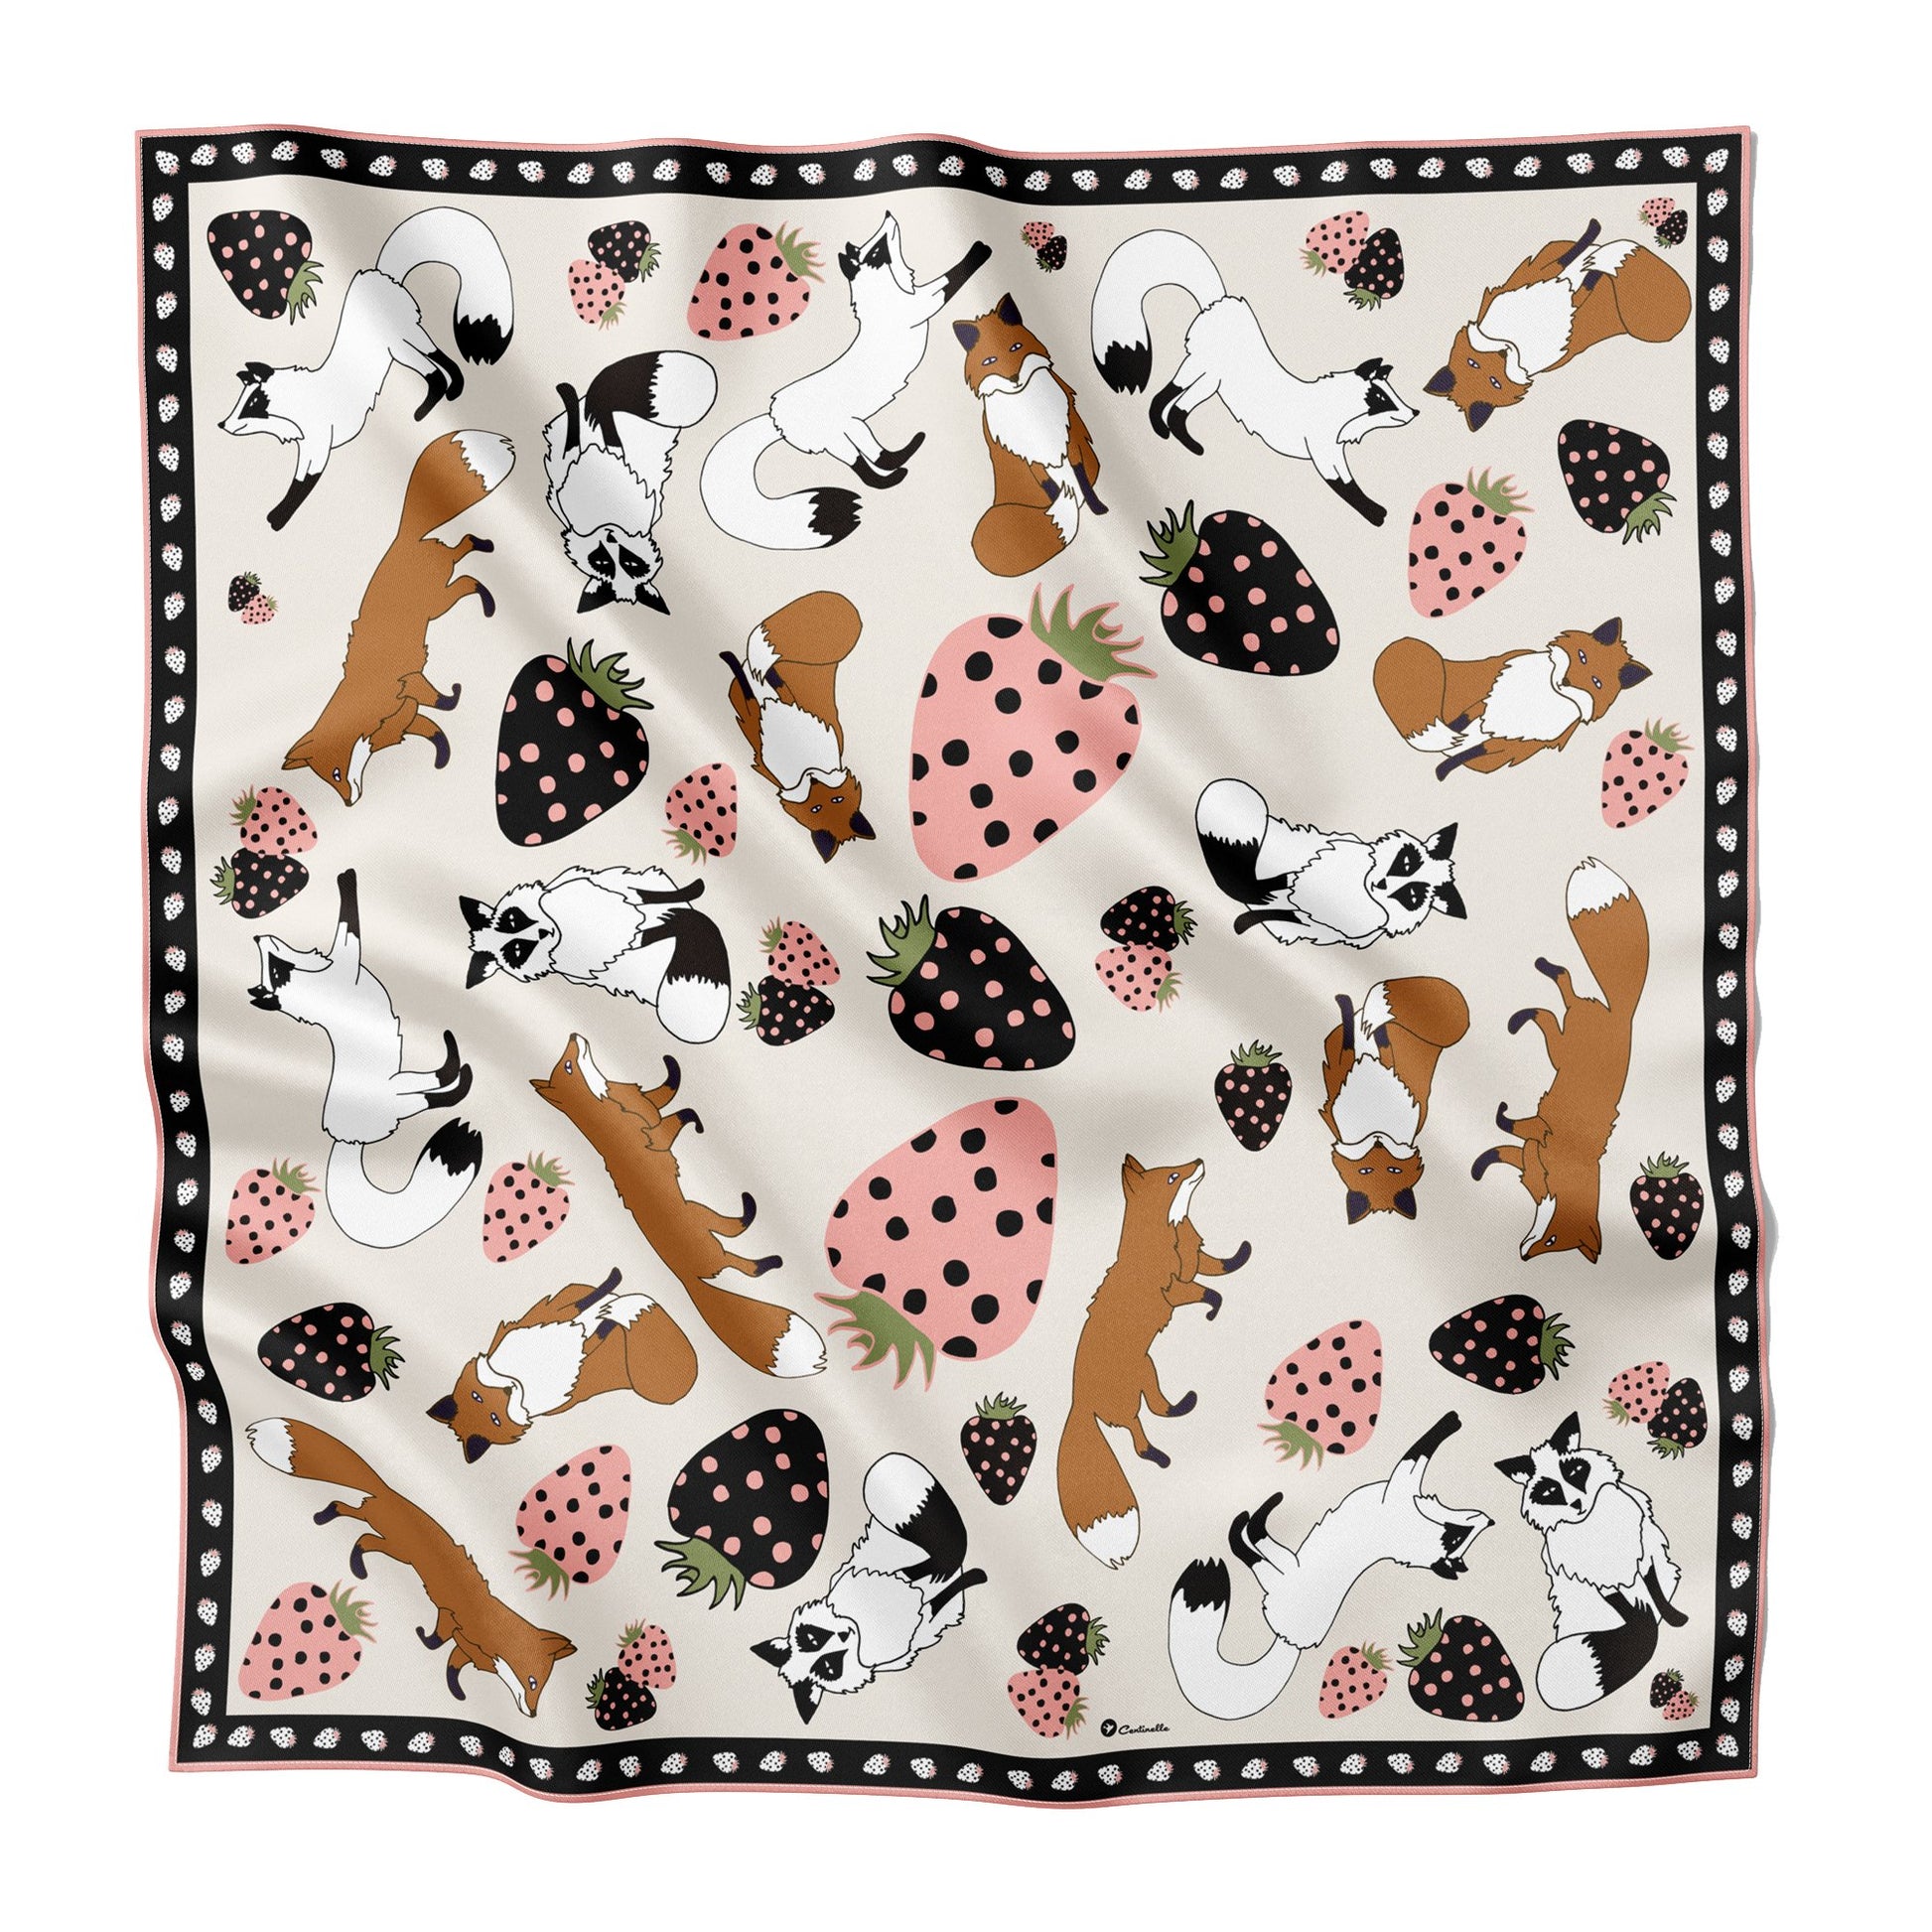 Strawberries and foxes on silk bandana size large.